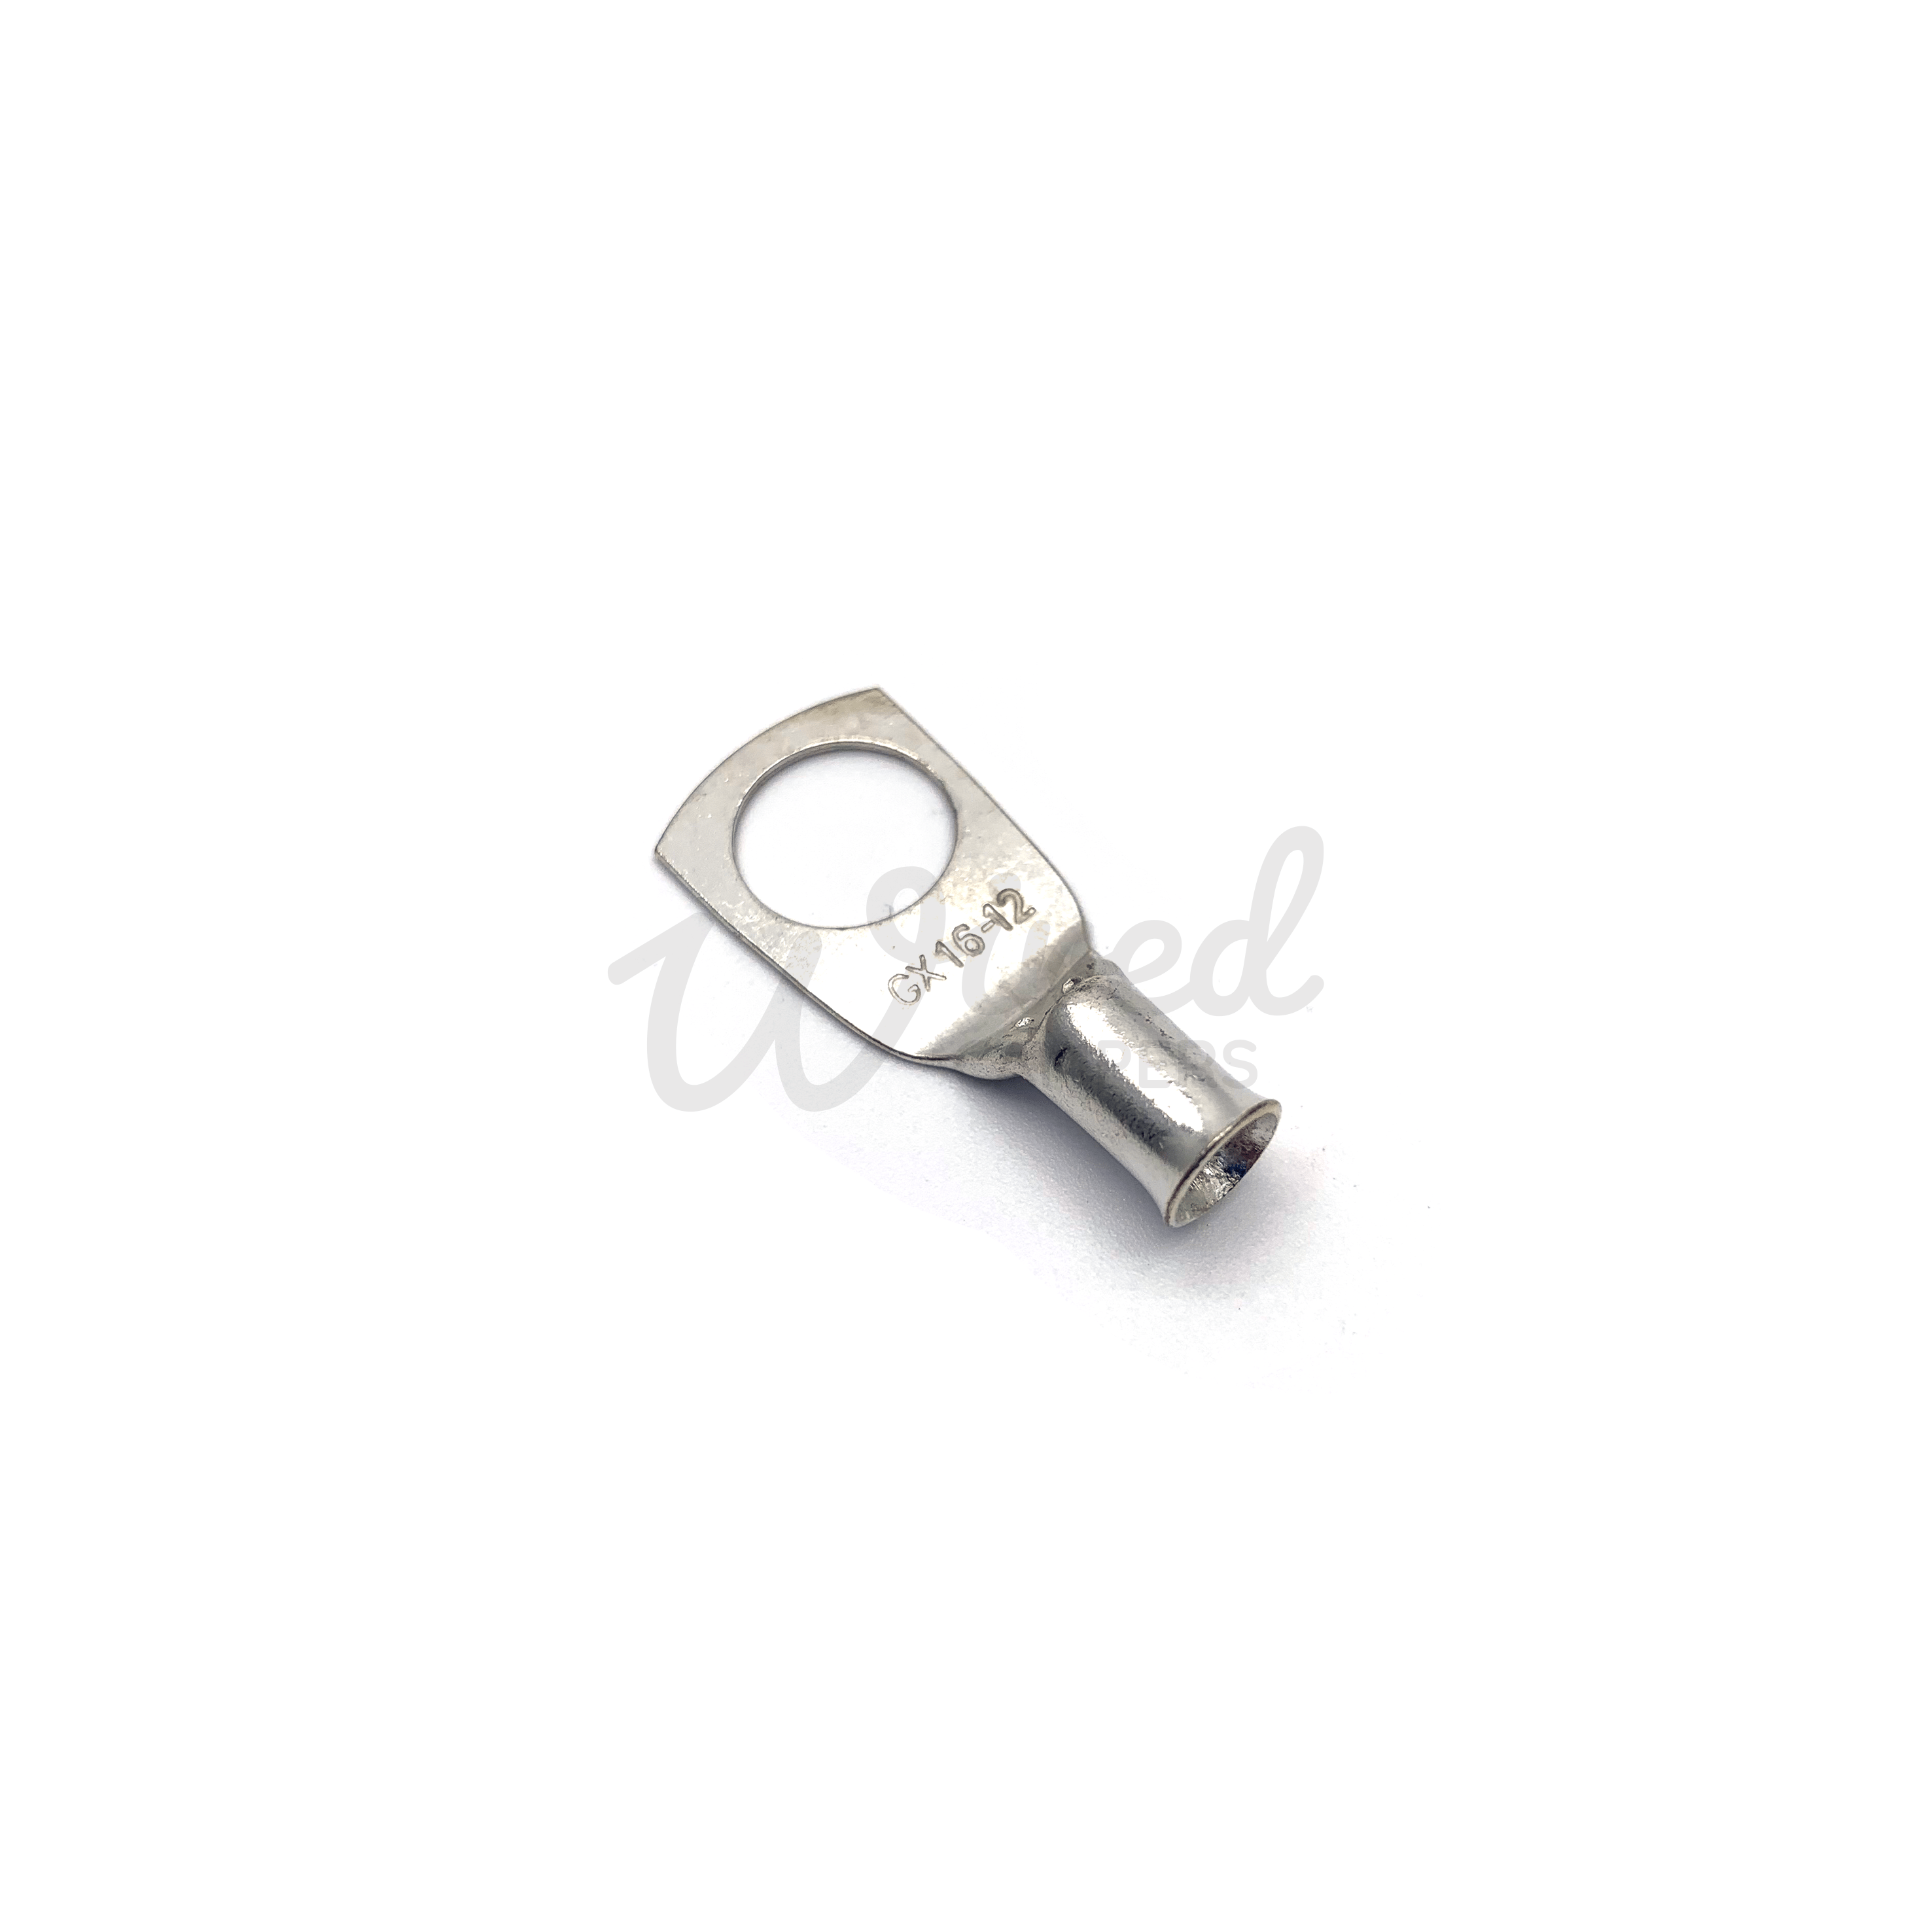 Wired Campers Limited 12mm 10 Pack - Copper Tube Crimp Ring Terminals 16mm² Cable Entry - 6mm/8mm/10mm/12mm Hole